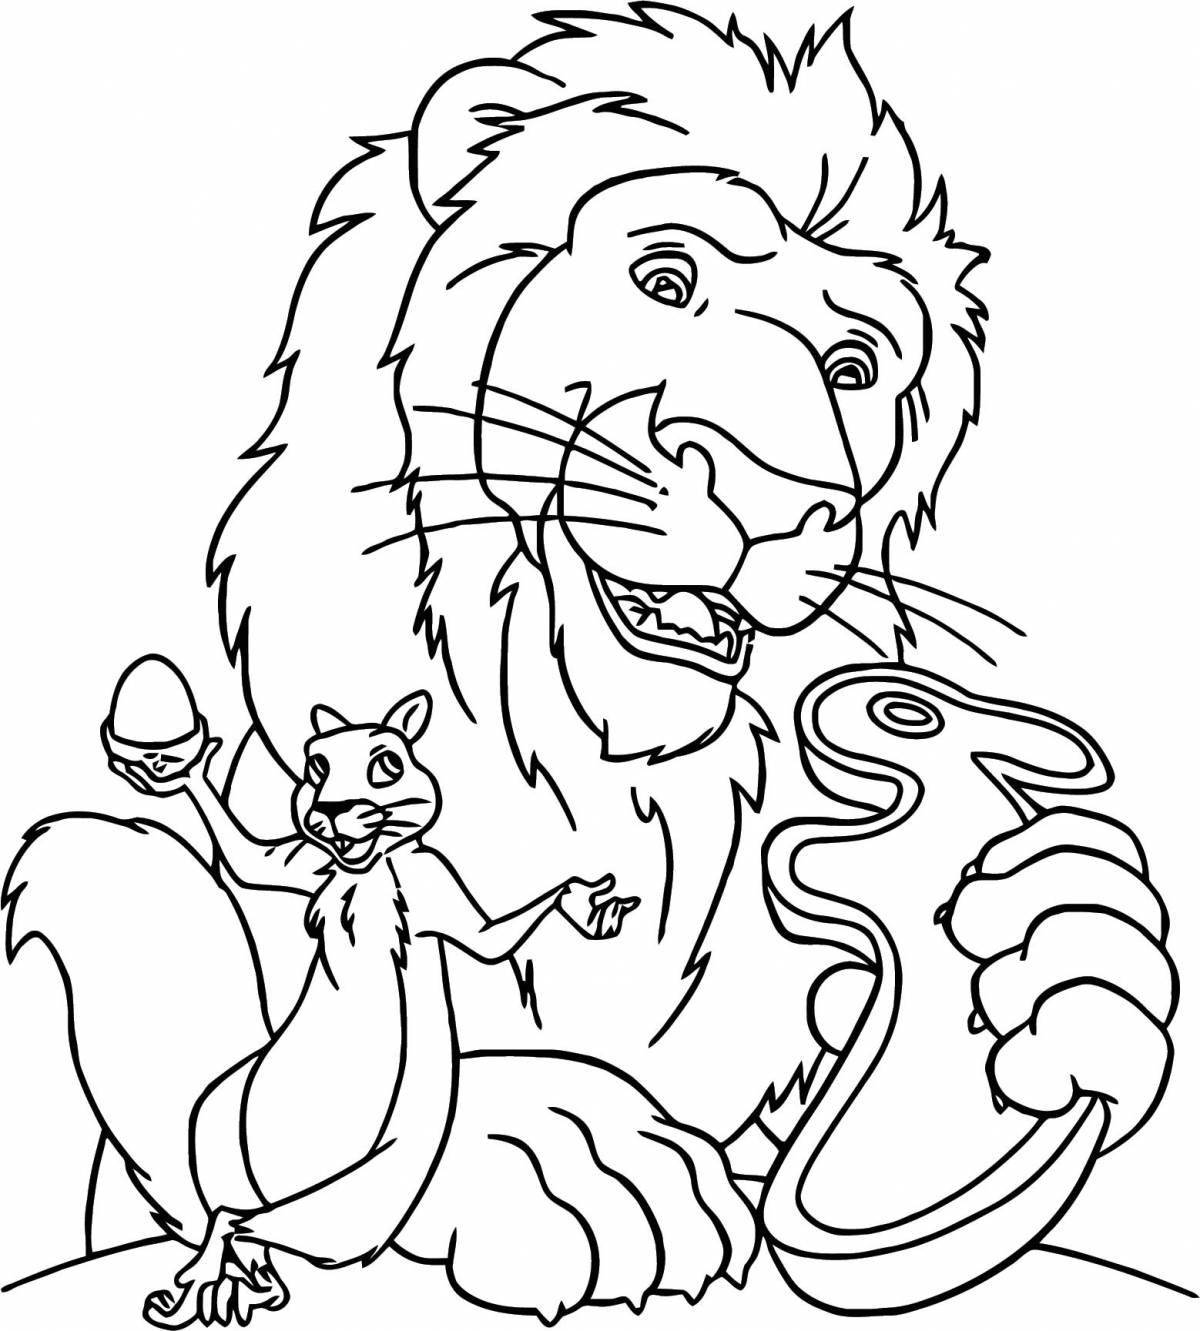 Elegant lion coloring book for children 6-7 years old